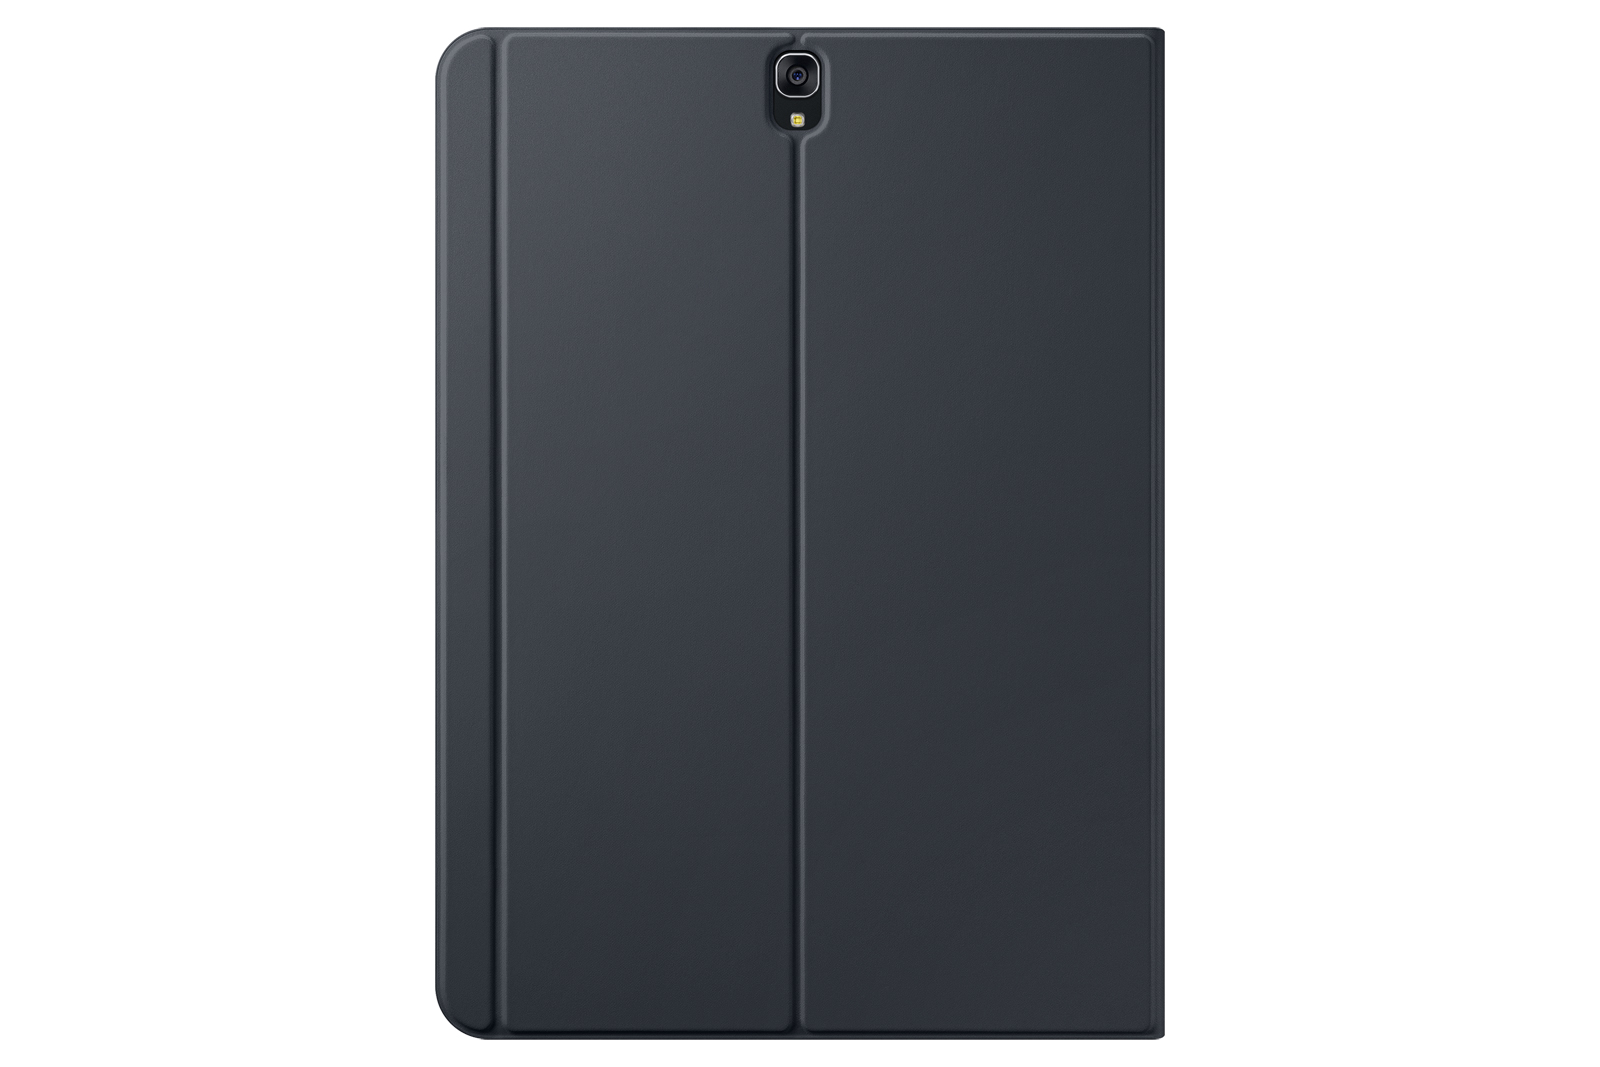 Larger View of Galaxy Tab S3 9.7" Book Cover